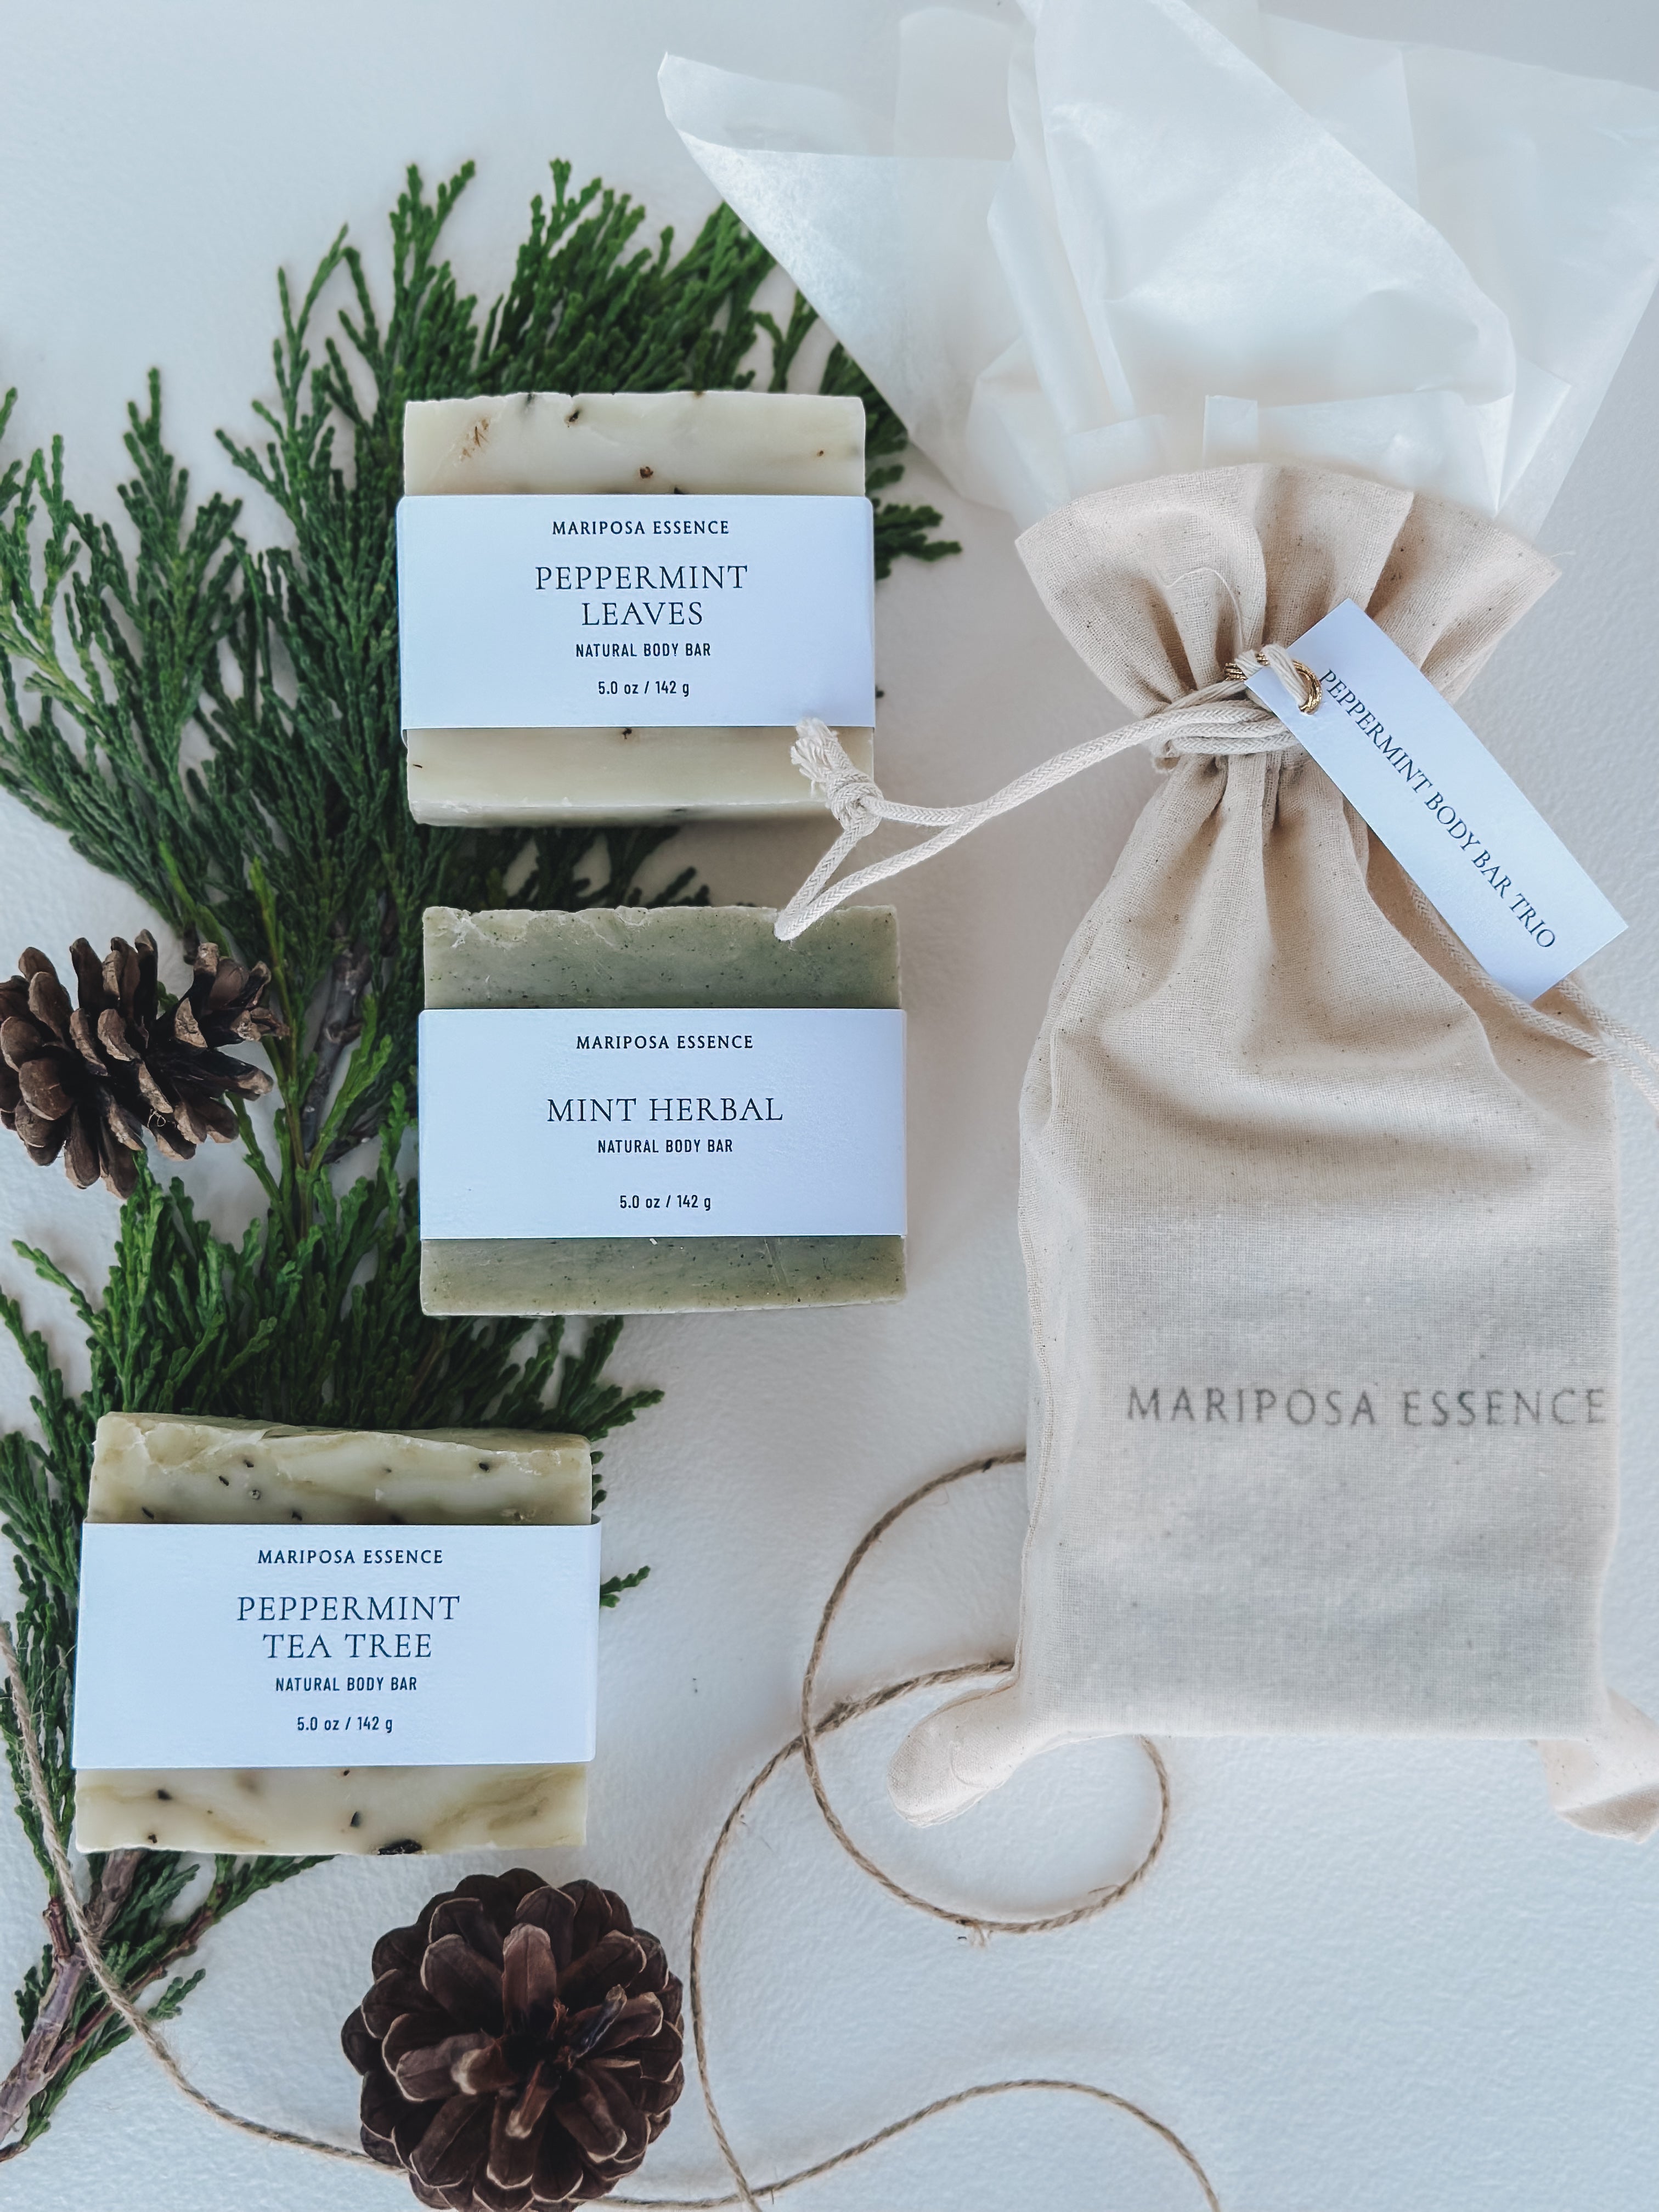 Peppermint Body Bar Trio giftwrapped with tissue and a muslin bag displayed with cypress and pinecones